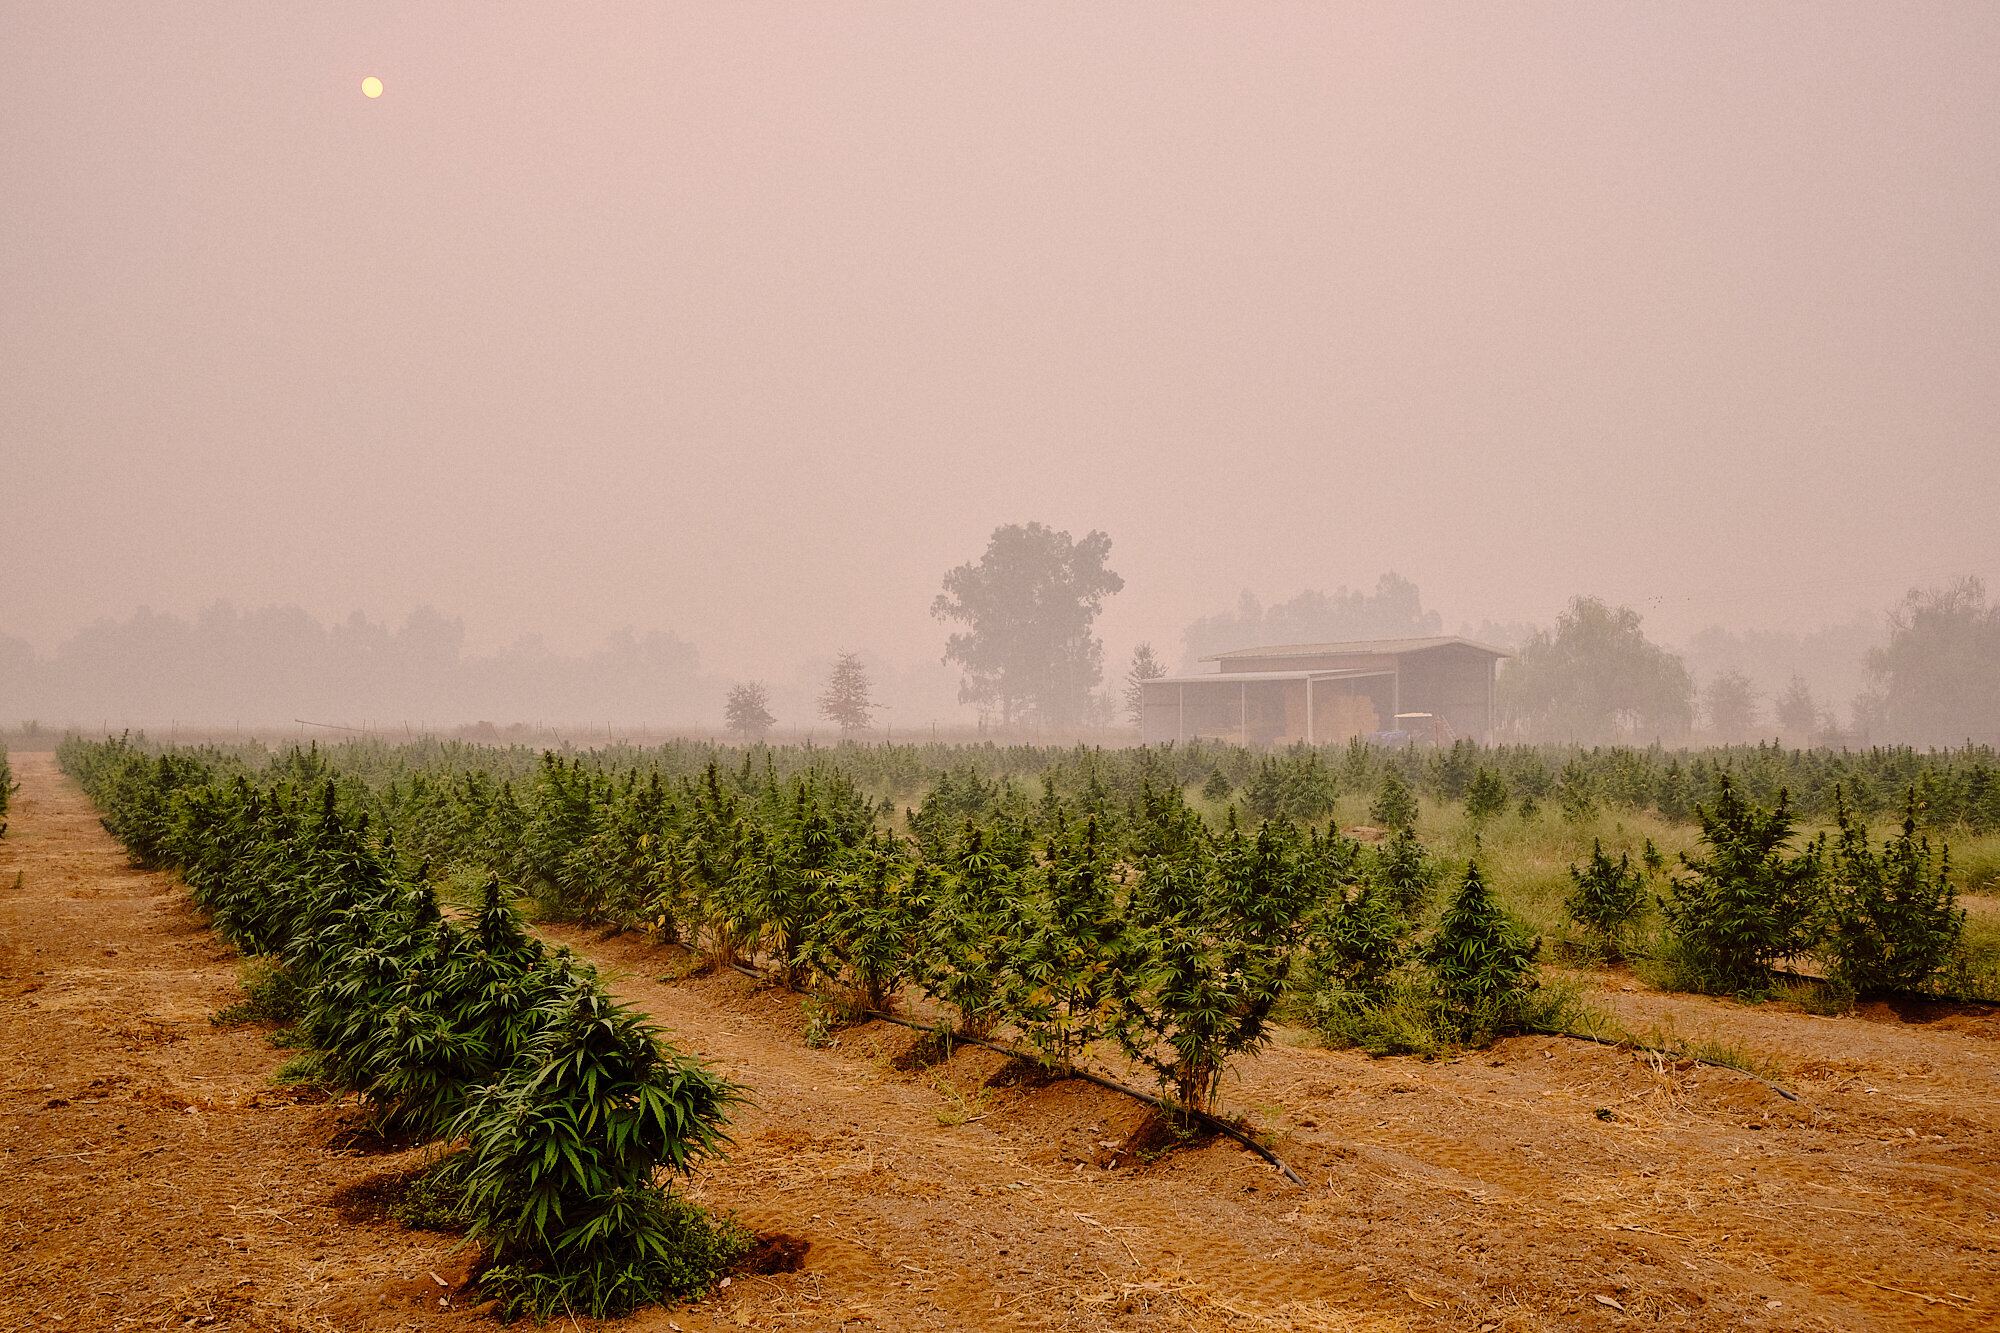  Moonshadow CBD's field of CBG producing hemp amidst the smoke from multiple nearby fires. The smoke got as bad as 540 on the Air Quality Index. | 9/12/20 Oroville, CA 